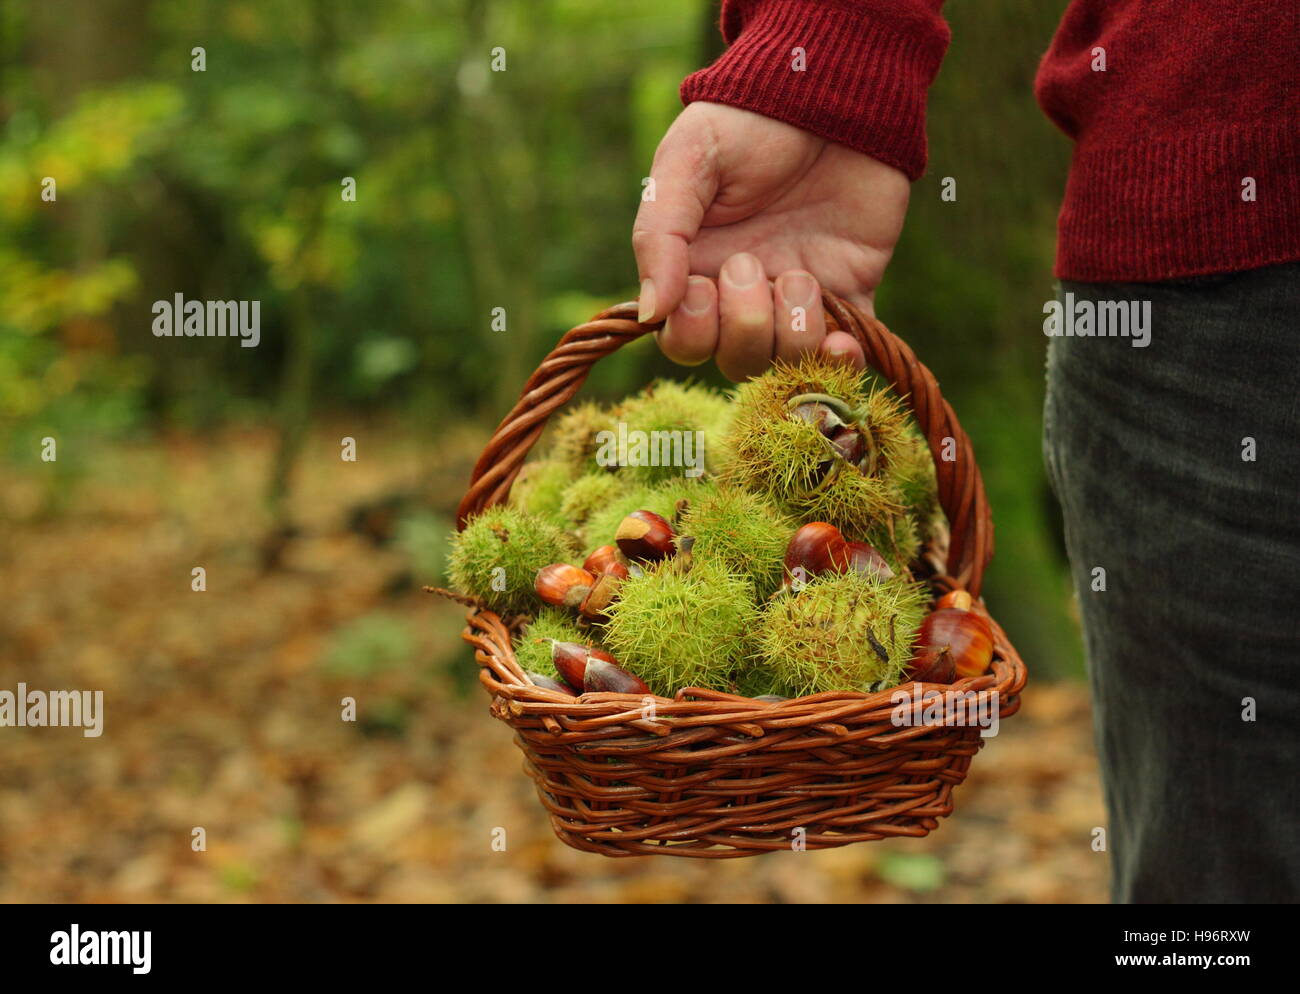 Freshly gathered sweet chestnuts (castanea sativa) carried in basket through Ecclesall Woods Sheffield, Yorkshire on a fine English autumn day. MR Stock Photo